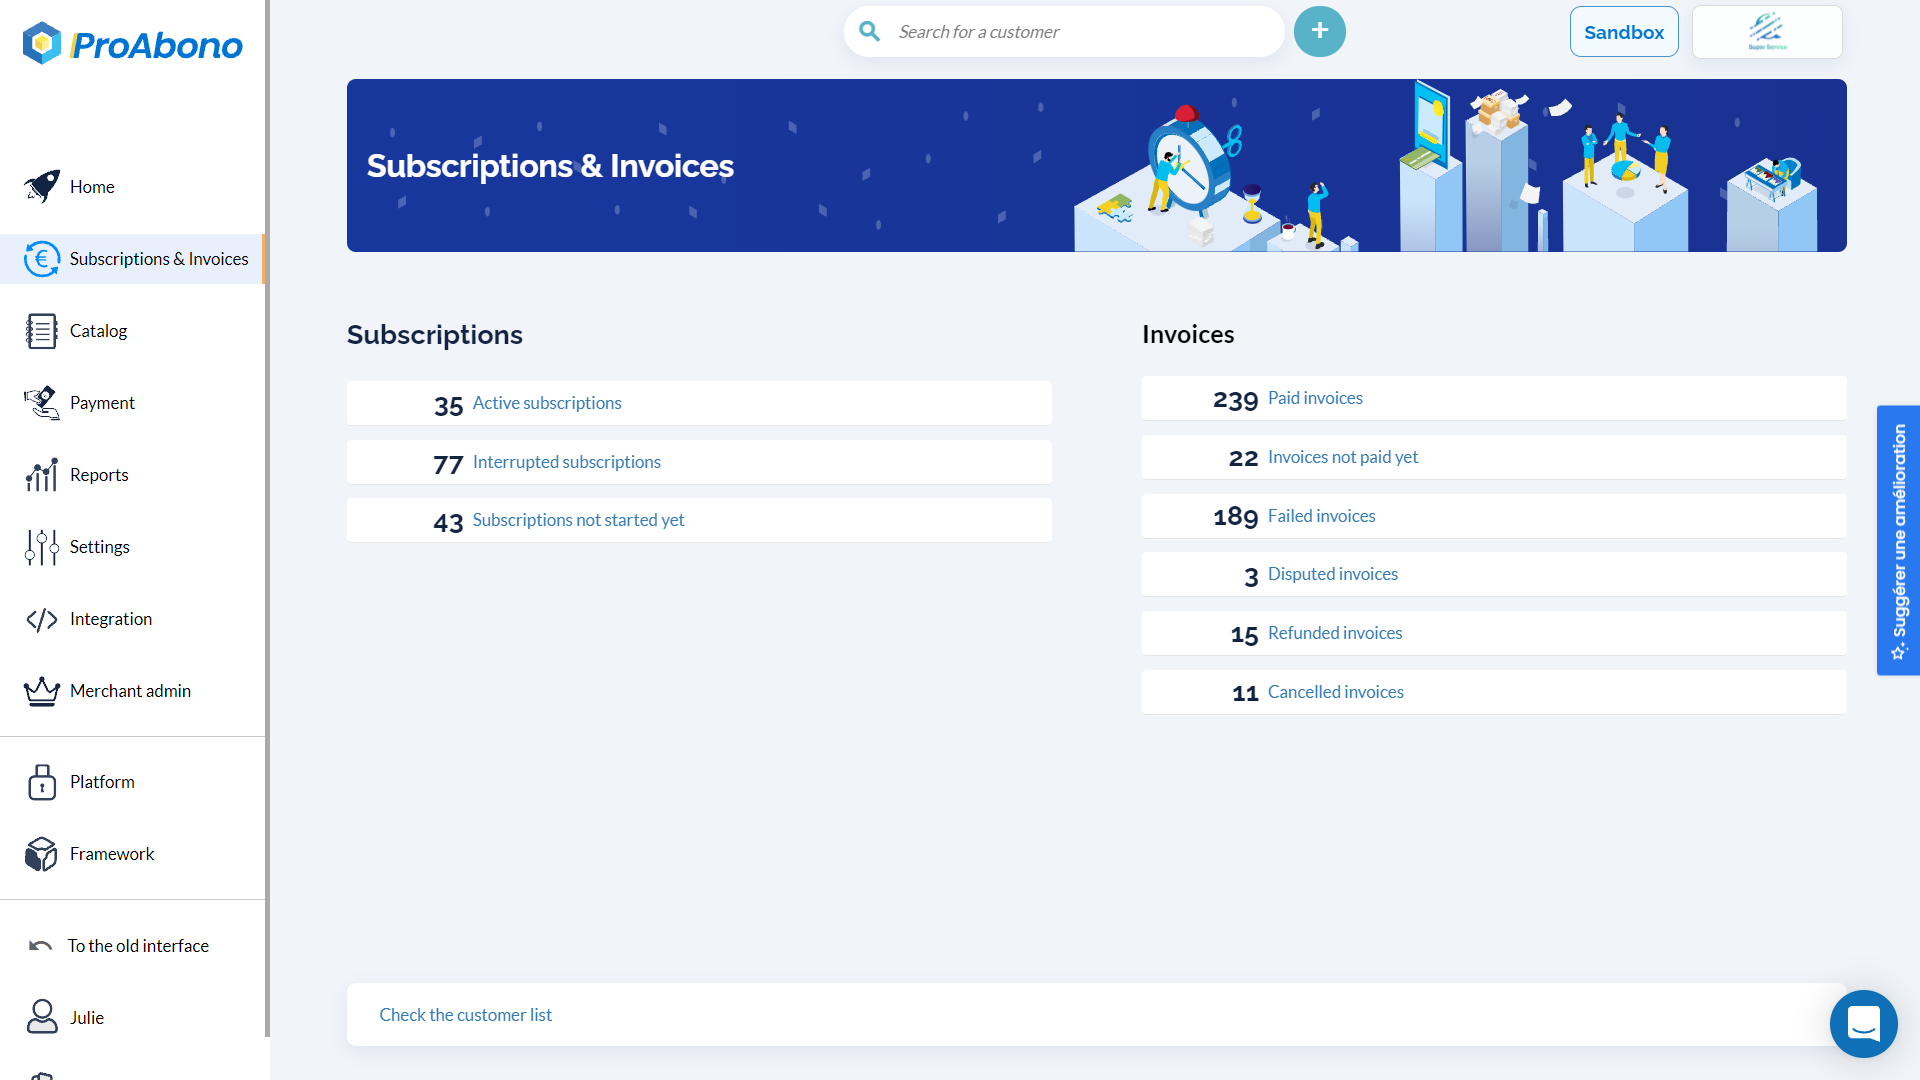 Find all your subscriptions, customers and invoices to manage your SaaS business